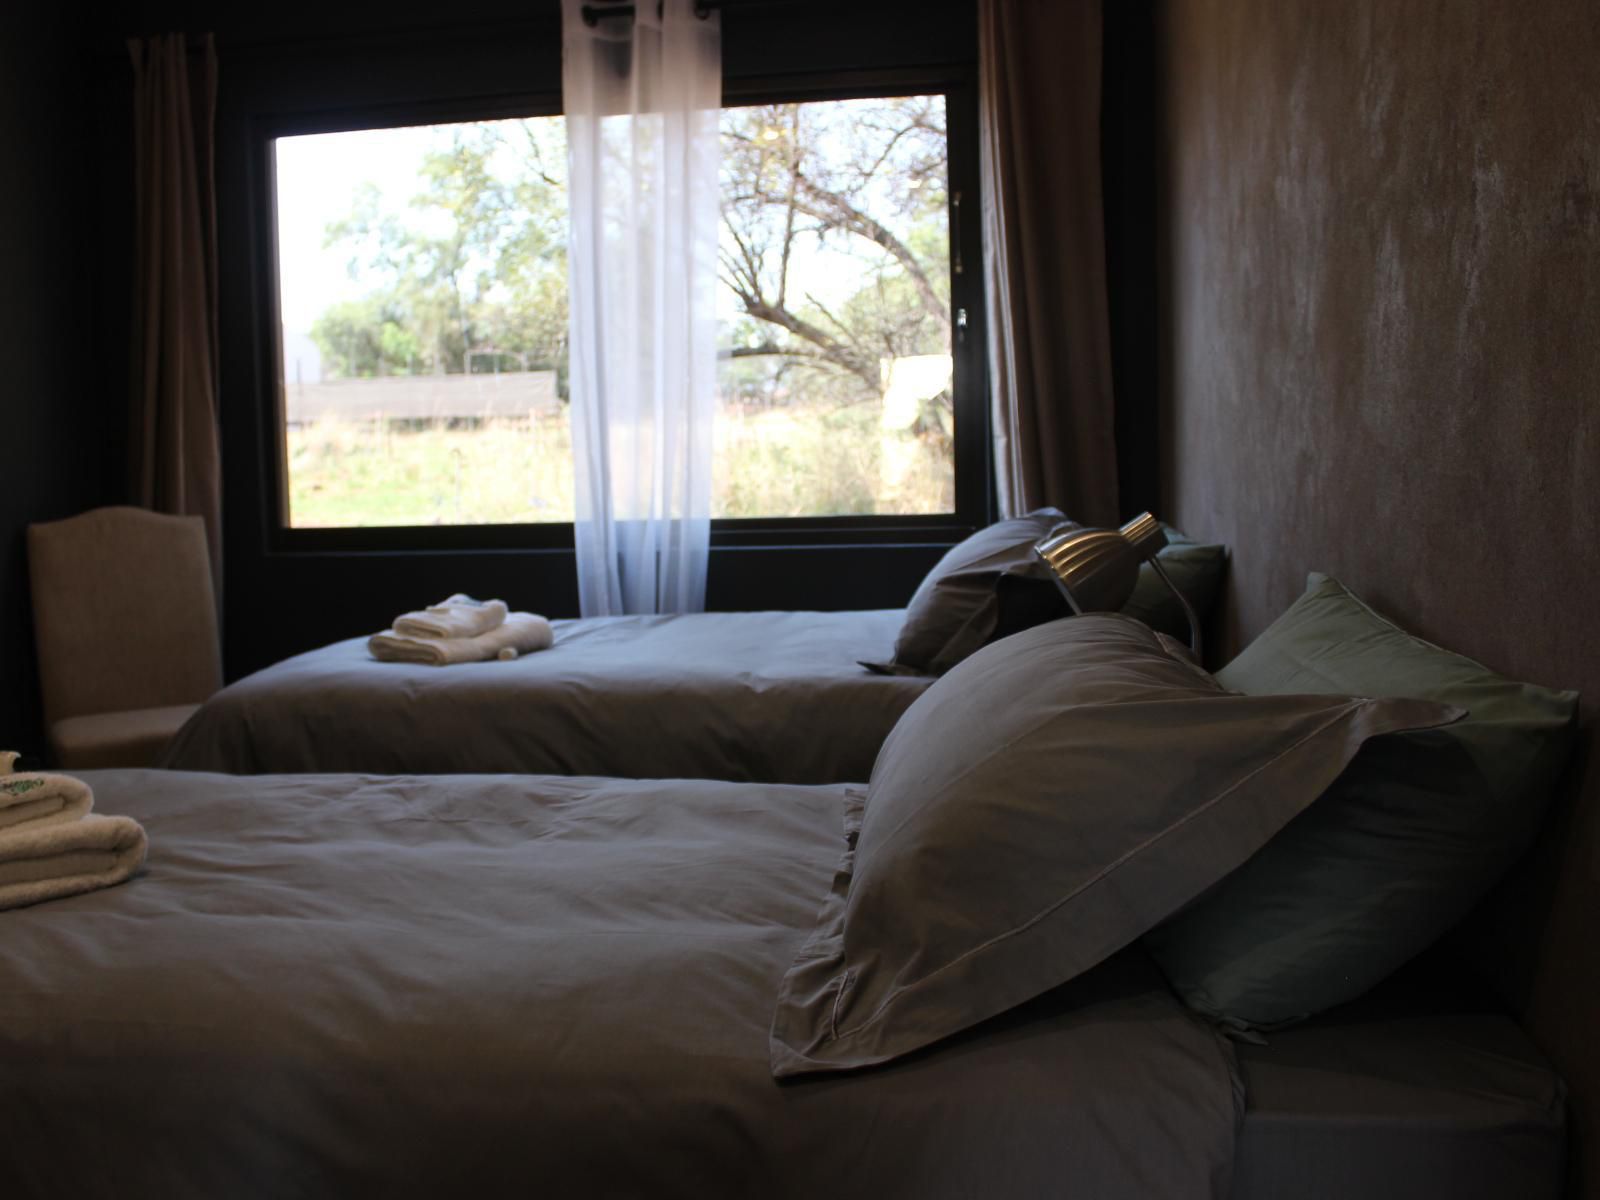 Wilgeboomsdrift Safaris Modimolle Nylstroom Limpopo Province South Africa Bedroom